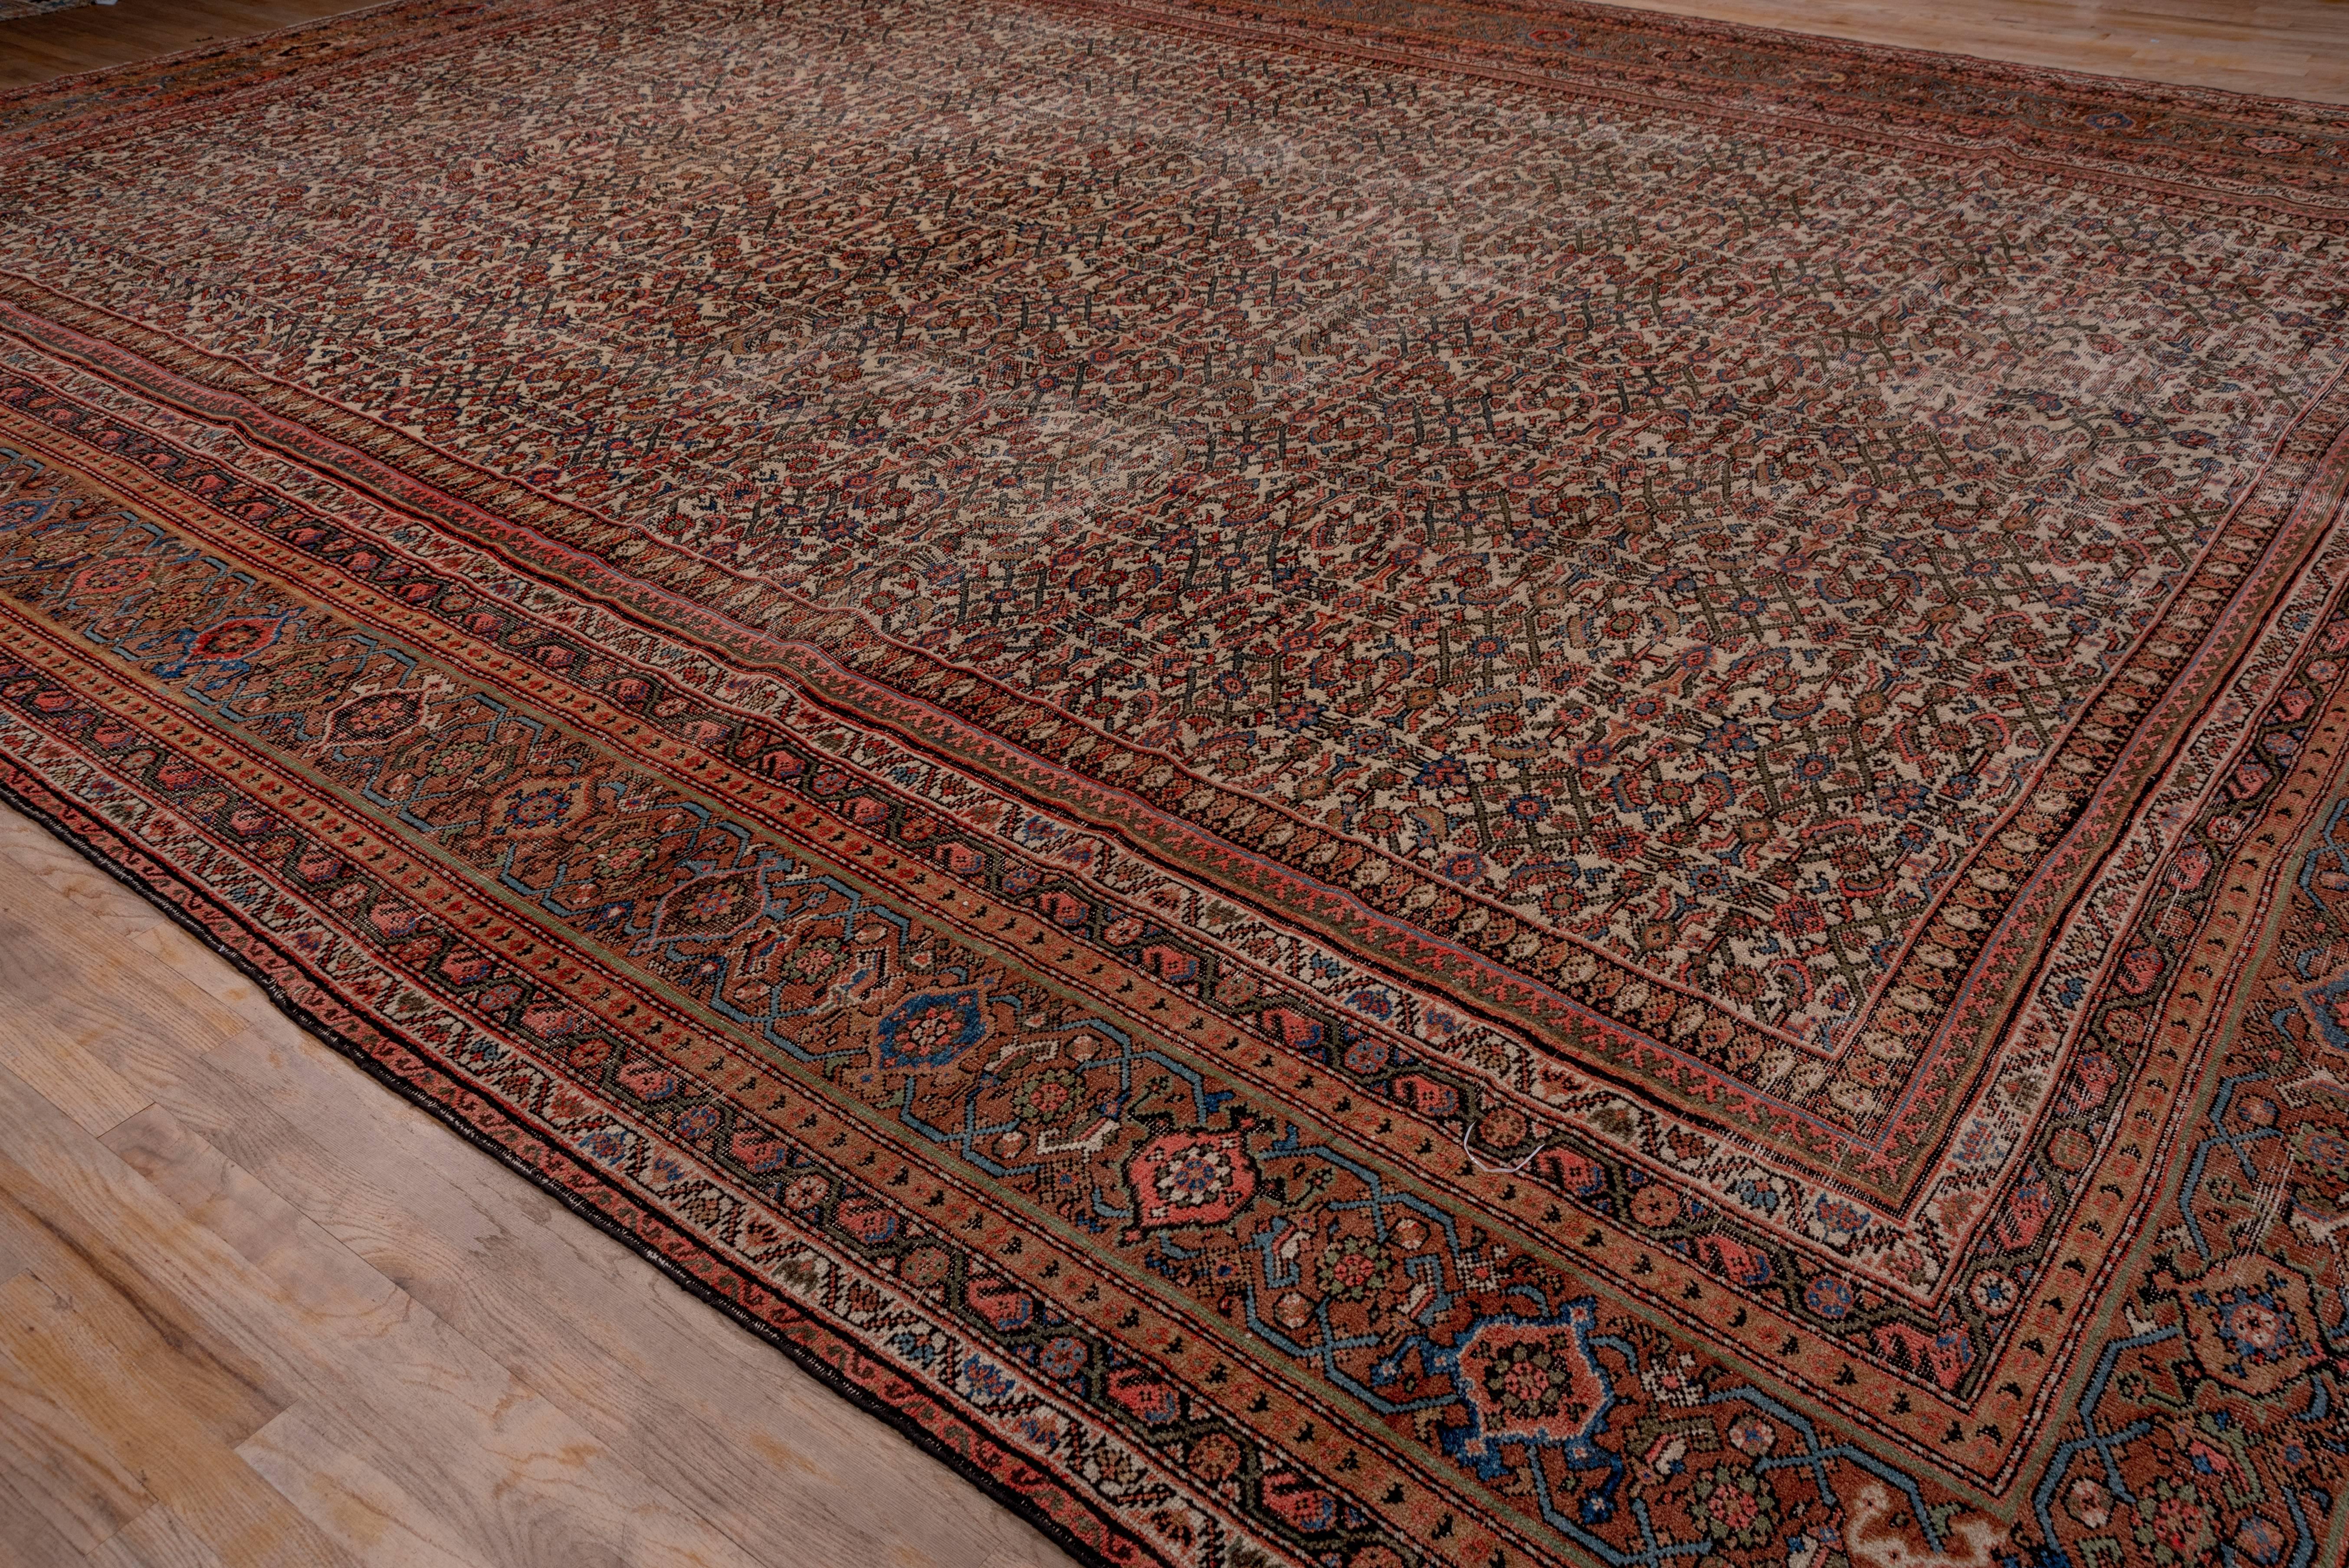 The ivory field shows a small scale, close Herati allover pattern within a rosy brown turtle palmette border and minors patterned with two styles of boteh ornament. The colors are slightly mellow. This west Persian rustic carpet has overall wear,